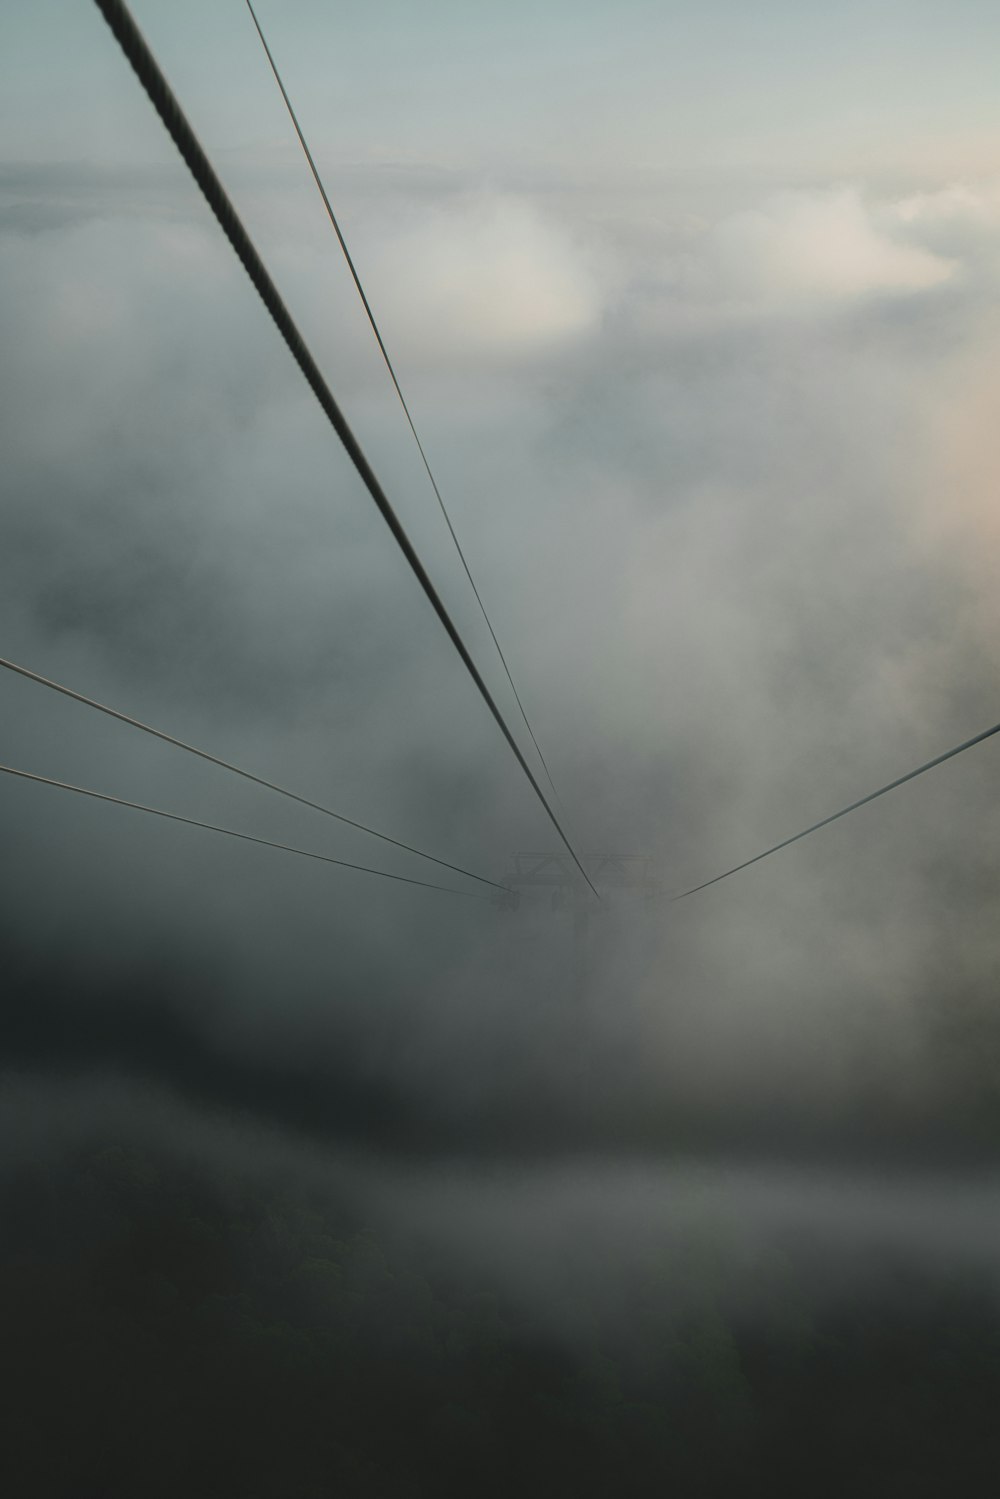 a view of a sky with clouds and power lines